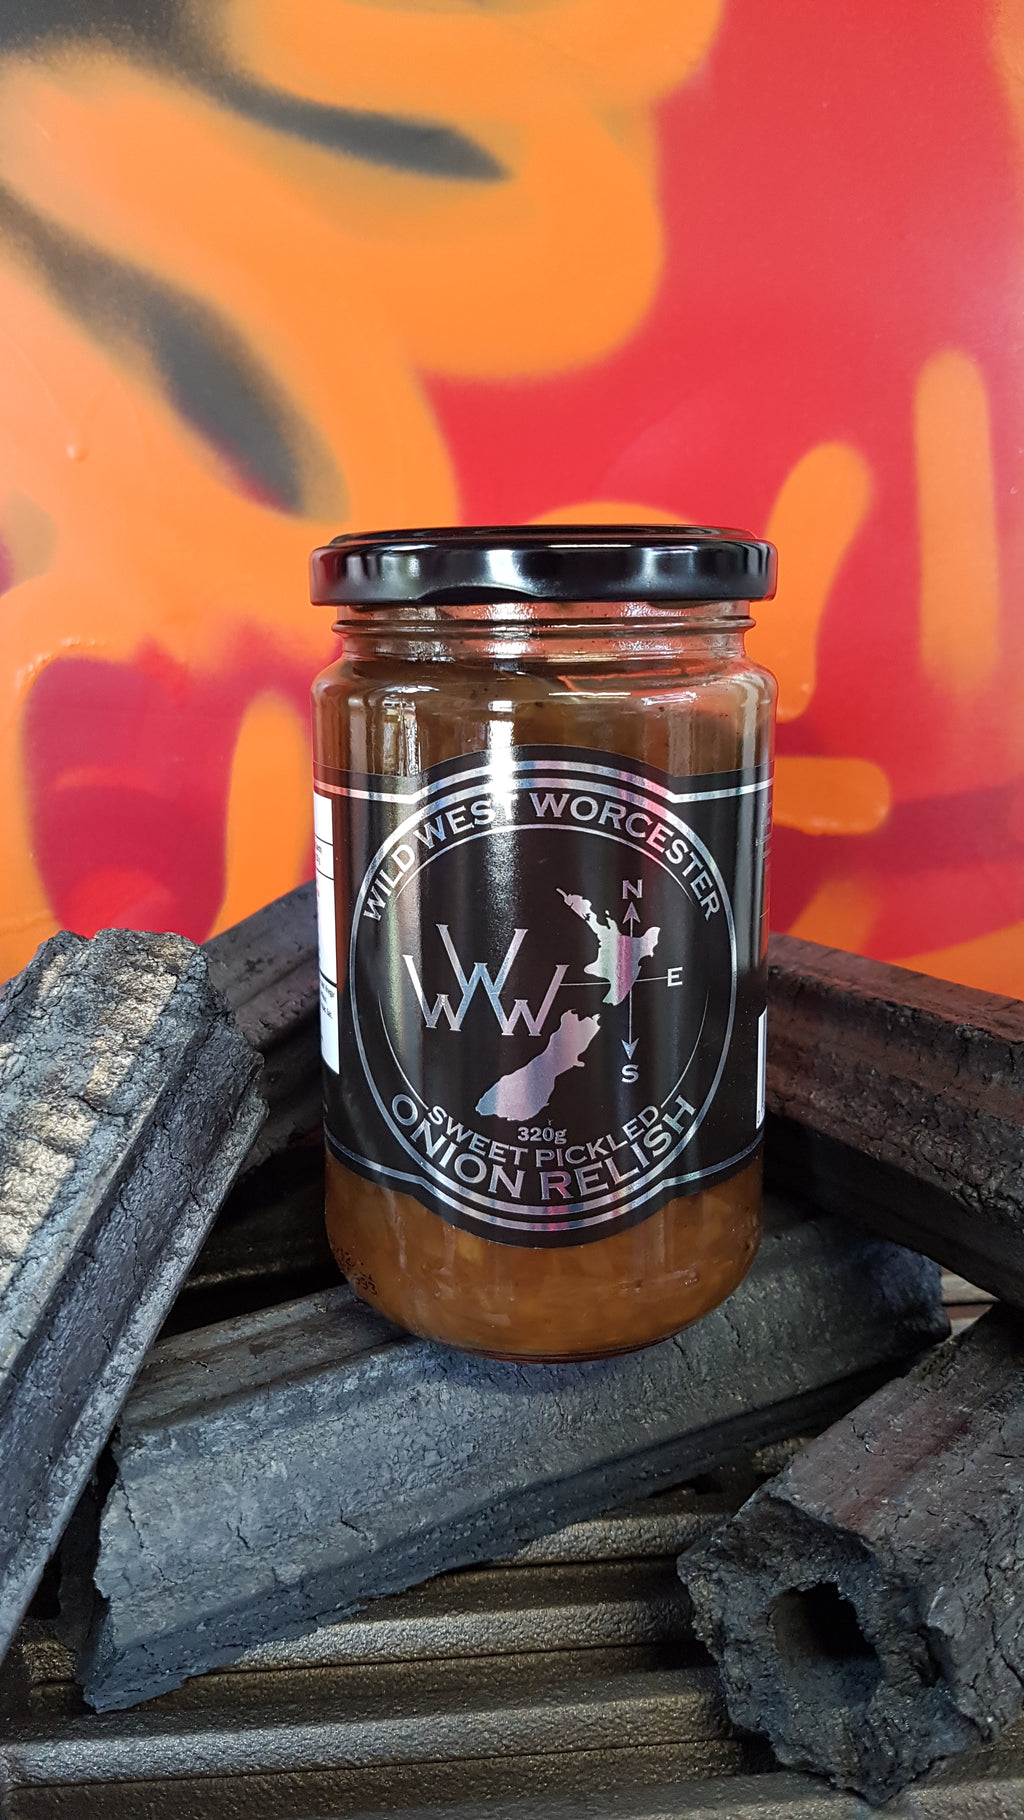 Sweet Pickled Onion Relish 320g by Wild West Worcester